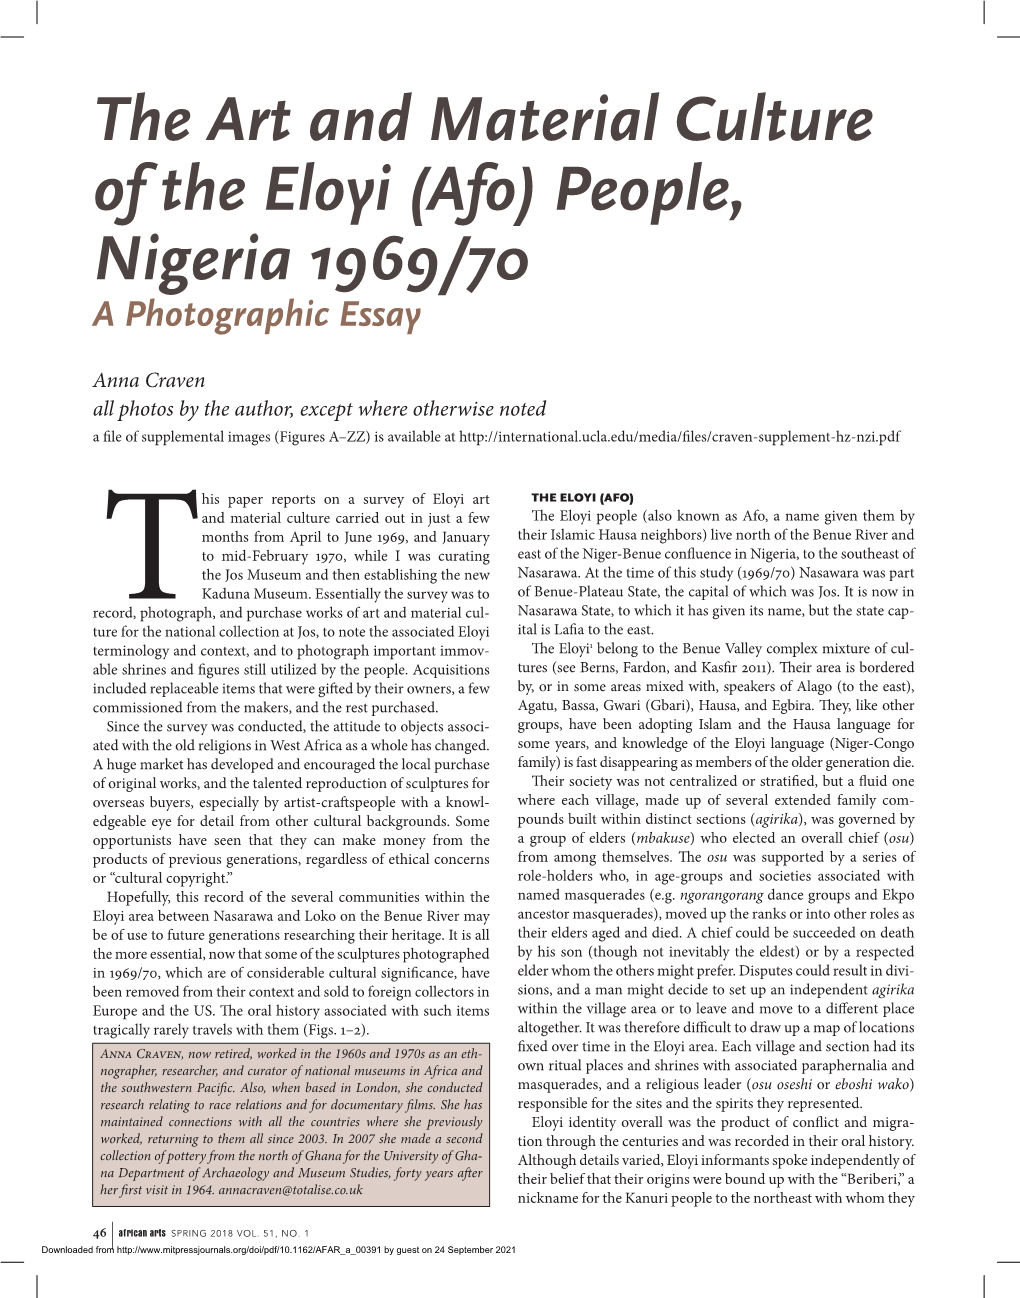 The Art and Material Culture of the Eloyi (Afo) People, Nigeria 1969/70 a Photographic Essay